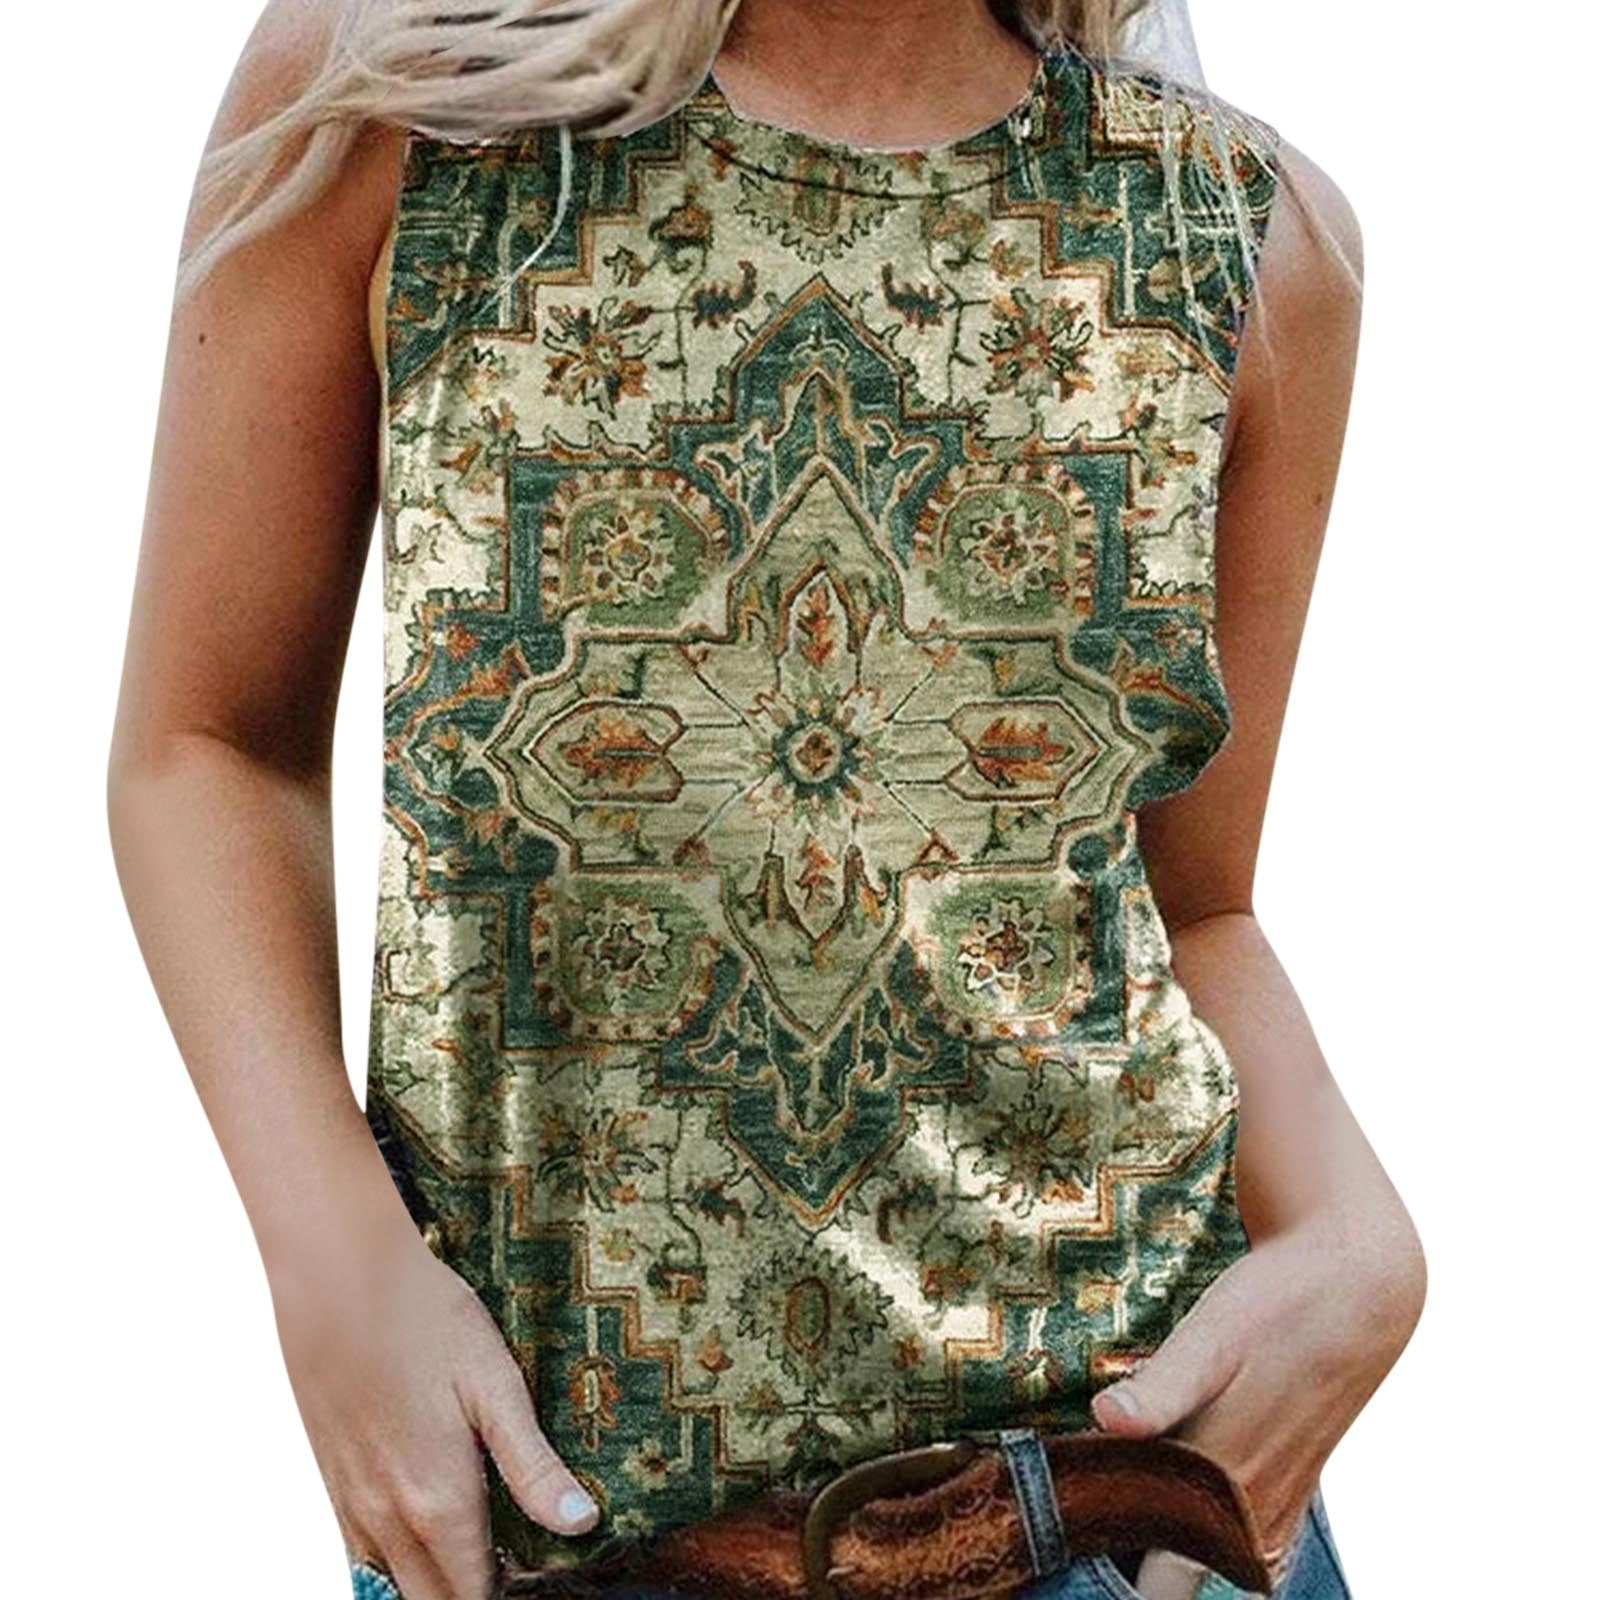 B91xZ Tank Tops With Built In Bras Women Casual Aztec Print Round Neck  Shirts Sleeveless Vest Tops Loose Splice T Shirts Green, L 